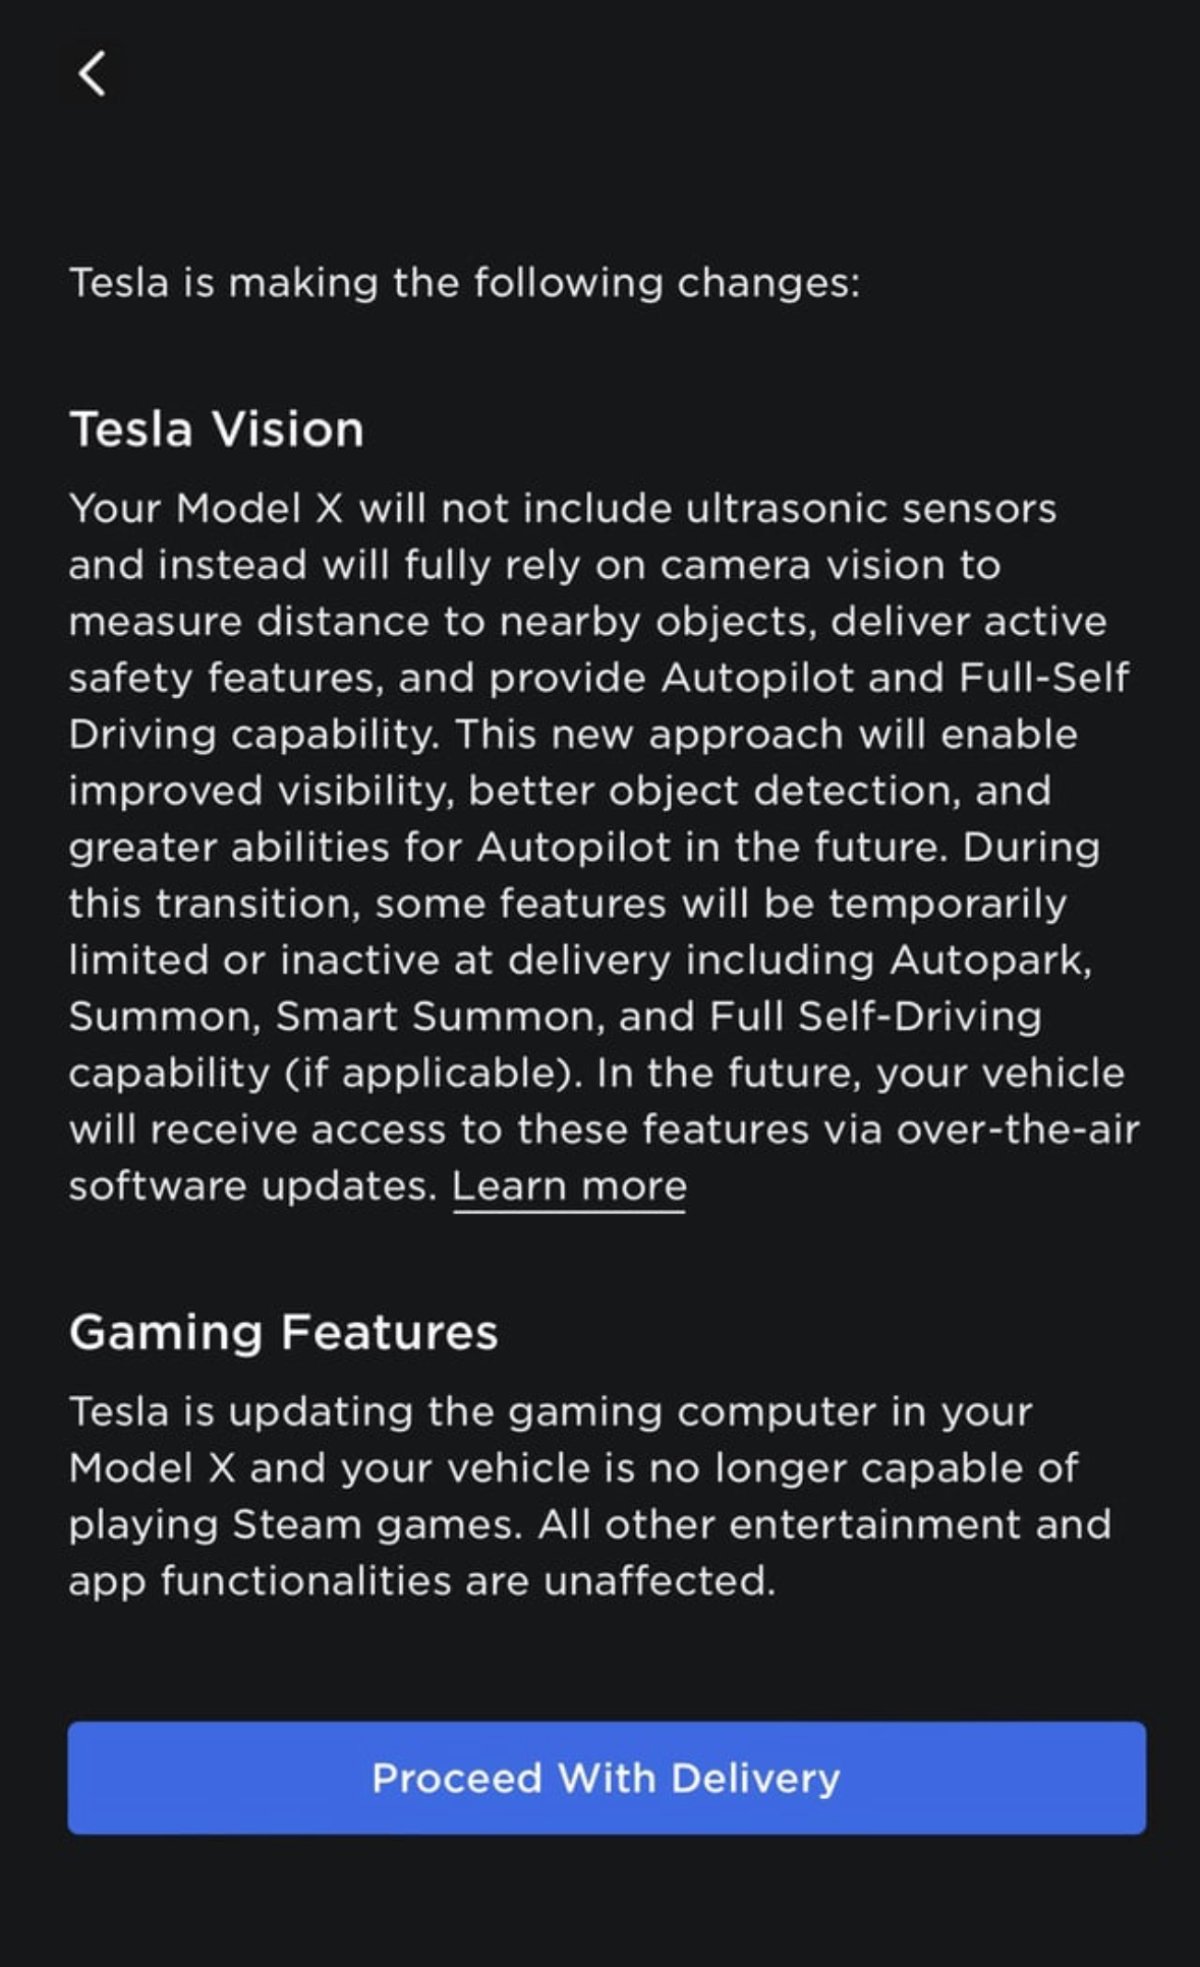 Tesla is removing Steam support on newer vehicles